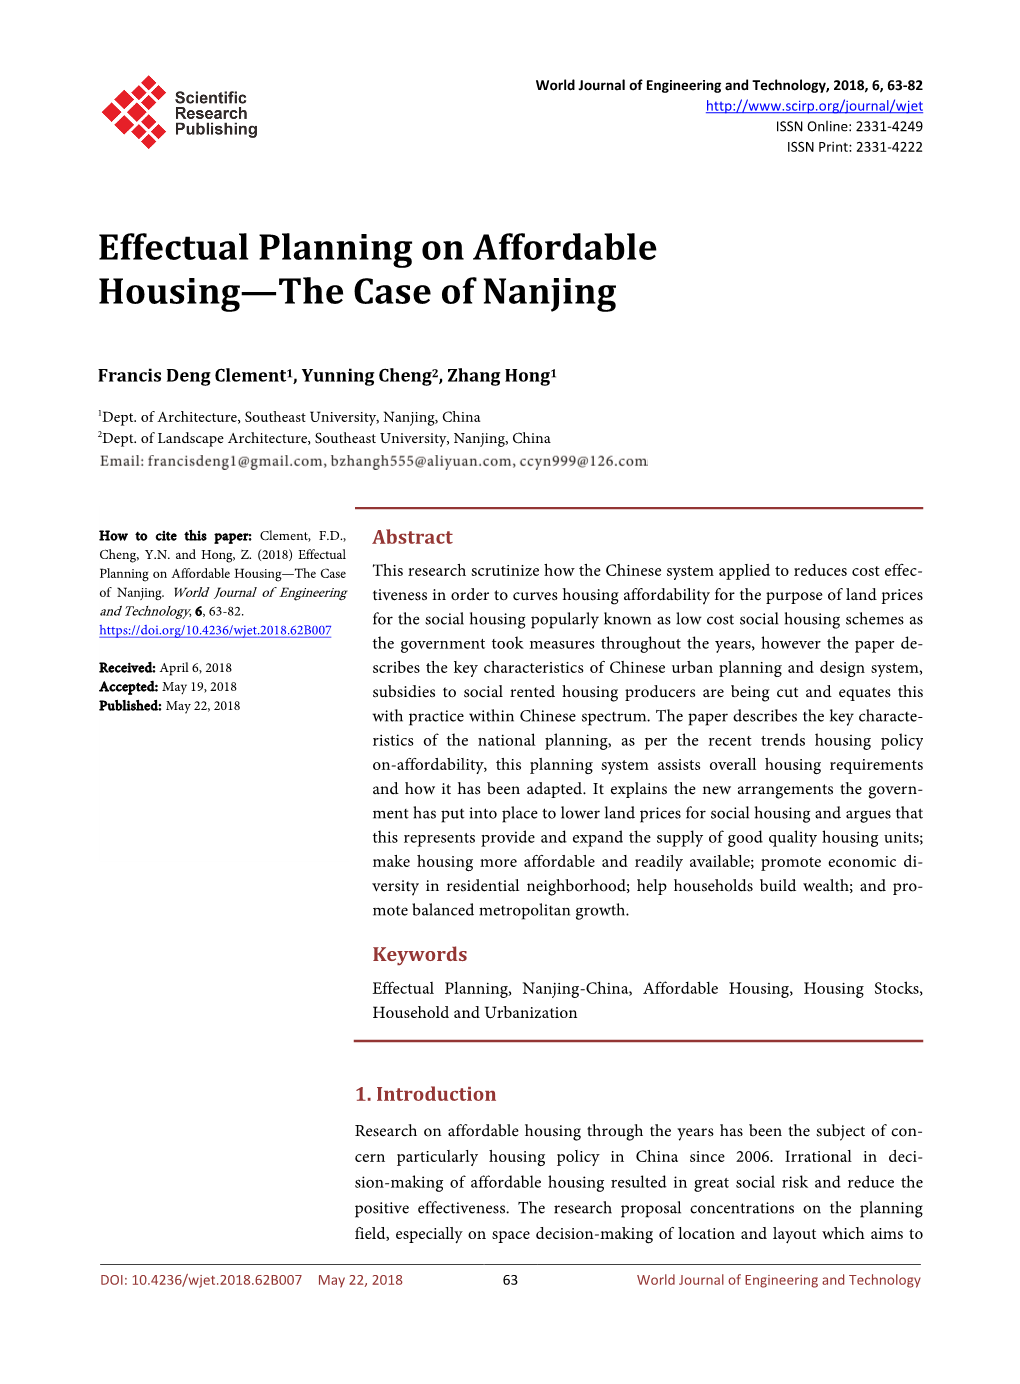 Effectual Planning on Affordable Housing—The Case of Nanjing